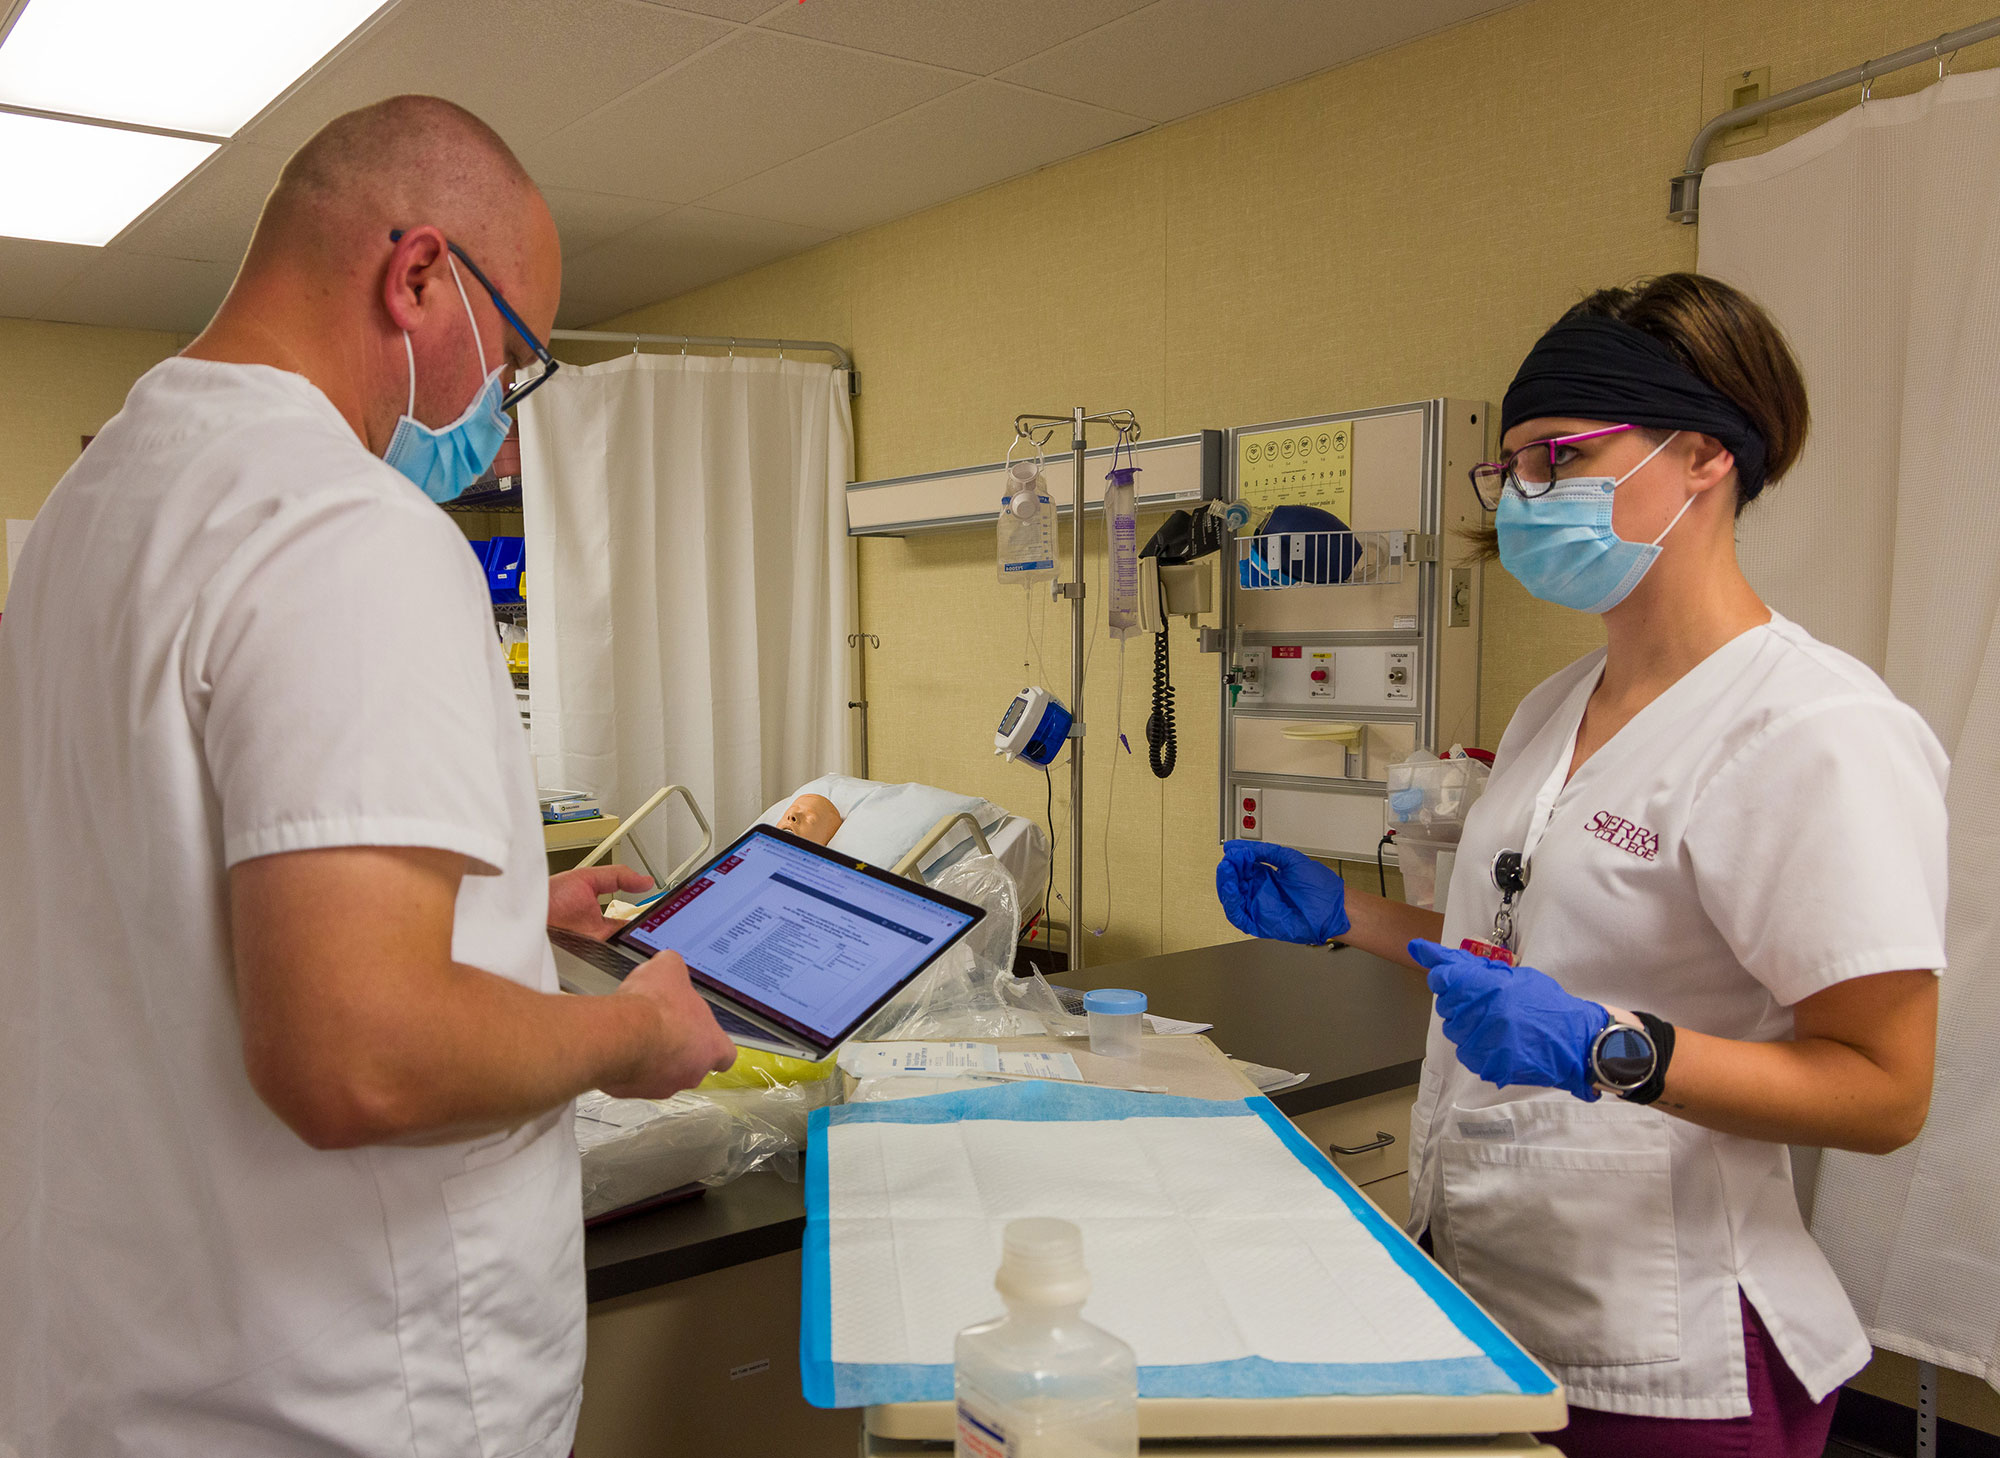 Male nursing student enters clinical information into tablet as female nursing student observes.